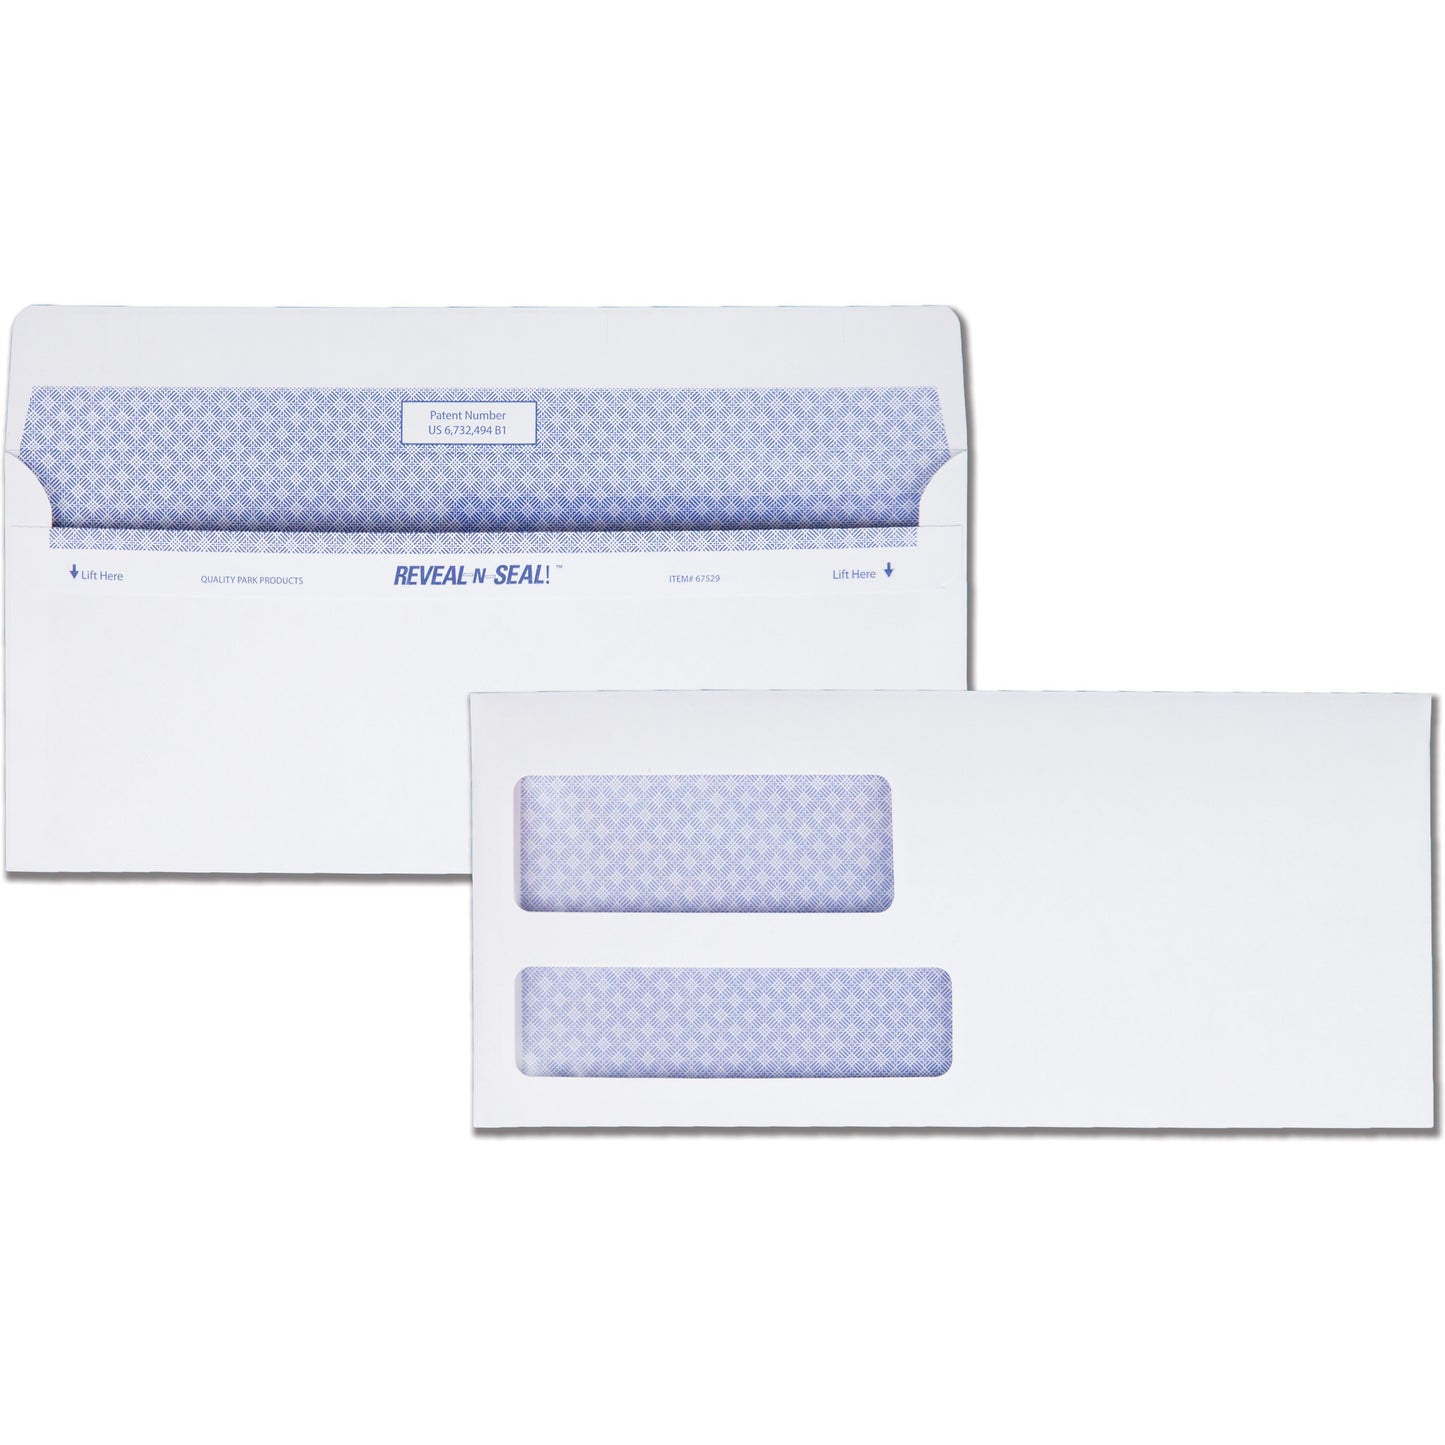 Quality Park Reveal-n-Seal Double Window Envelopes